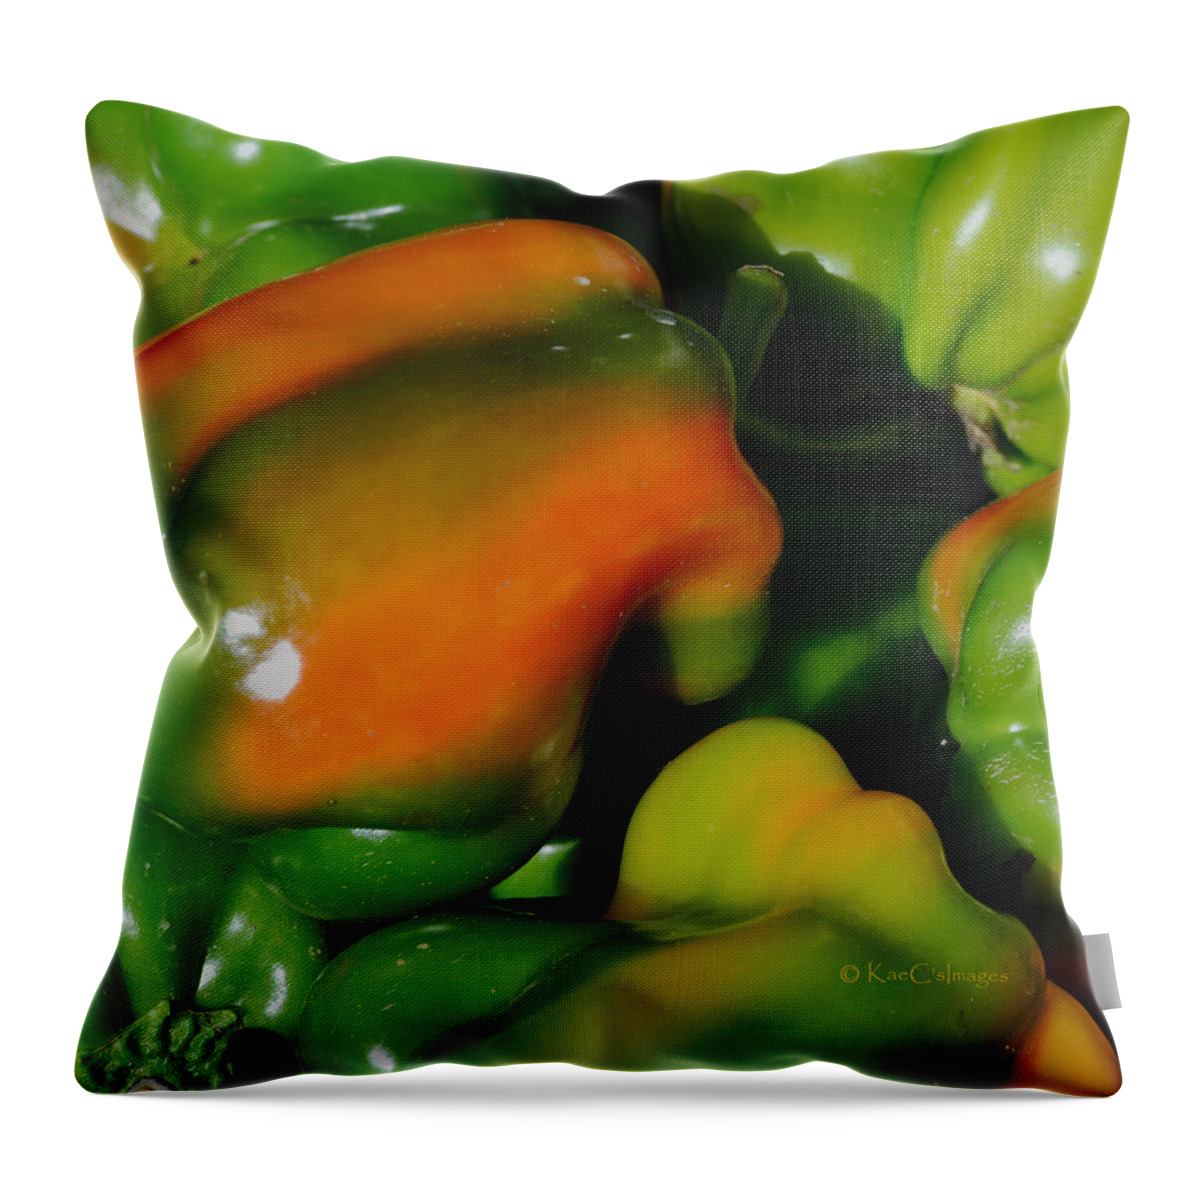 Green Peppers Throw Pillow featuring the photograph Peppers by Kae Cheatham